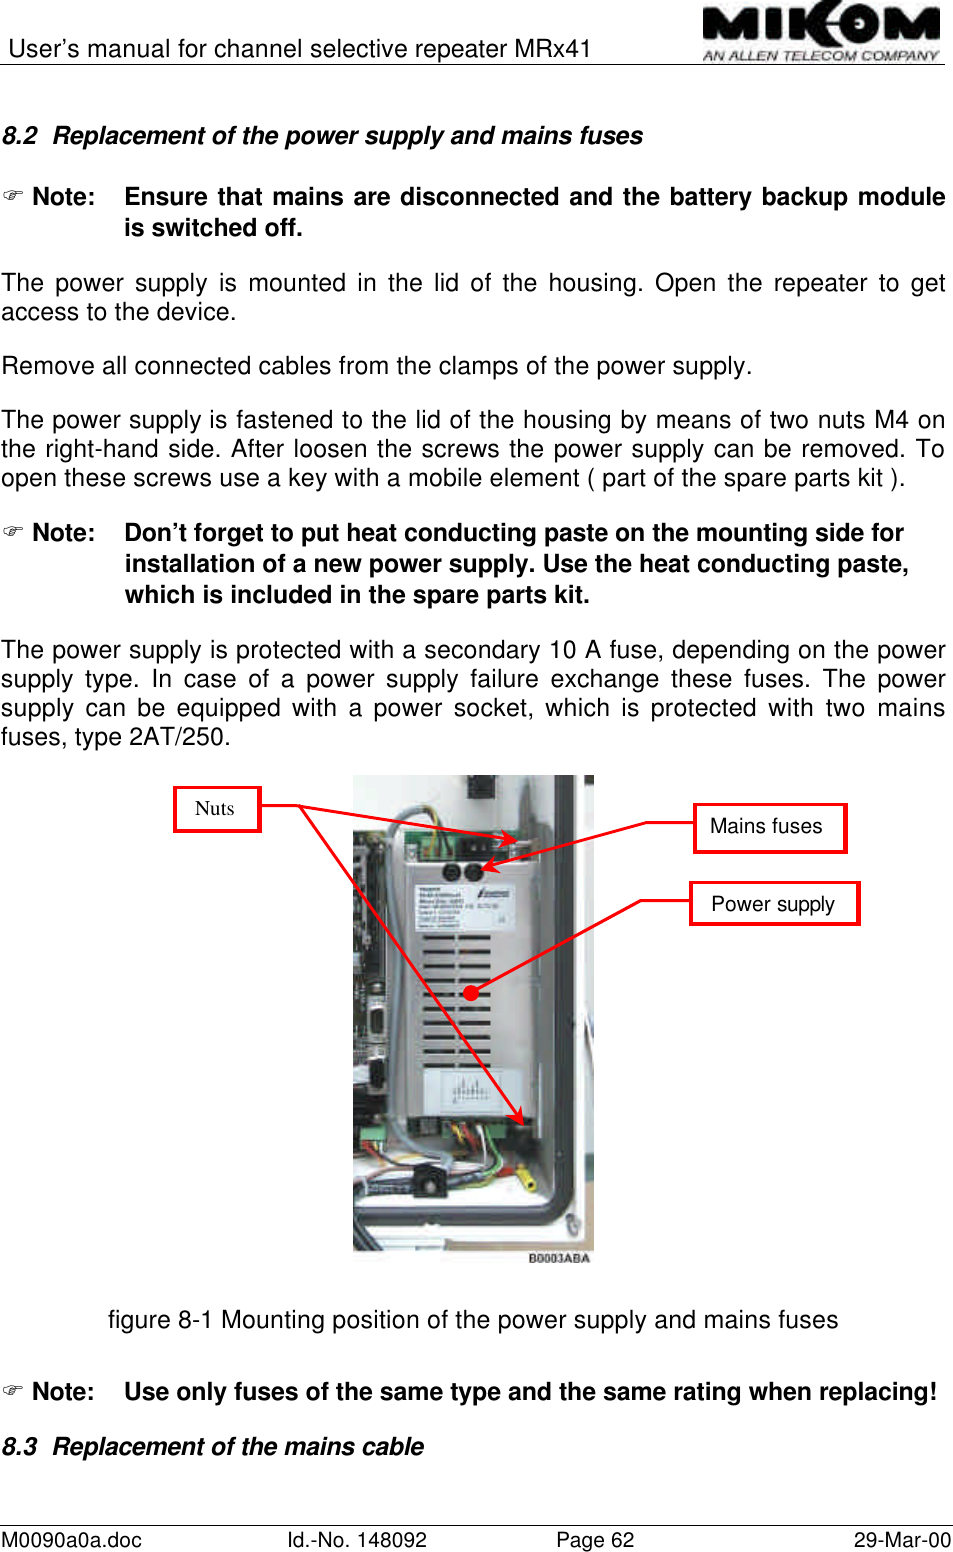 User’s manual for channel selective repeater MRx41M0090a0a.doc Id.-No. 148092 Page 62 29-Mar-008.2 Replacement of the power supply and mains fusesF Note: Ensure that mains are disconnected and the battery backup moduleis switched off.The power supply is mounted in the lid of the housing. Open the repeater to getaccess to the device.Remove all connected cables from the clamps of the power supply.The power supply is fastened to the lid of the housing by means of two nuts M4 onthe right-hand side. After loosen the screws the power supply can be removed. Toopen these screws use a key with a mobile element ( part of the spare parts kit ).F Note: Don’t forget to put heat conducting paste on the mounting side forinstallation of a new power supply. Use the heat conducting paste,which is included in the spare parts kit.The power supply is protected with a secondary 10 A fuse, depending on the powersupply type. In case of a power supply failure exchange these fuses. The powersupply can be equipped with a power socket, which is protected with two mainsfuses, type 2AT/250.figure 8-1 Mounting position of the power supply and mains fusesF Note:  Use only fuses of the same type and the same rating when replacing!8.3 Replacement of the mains cablePower supplyMains fusesNuts